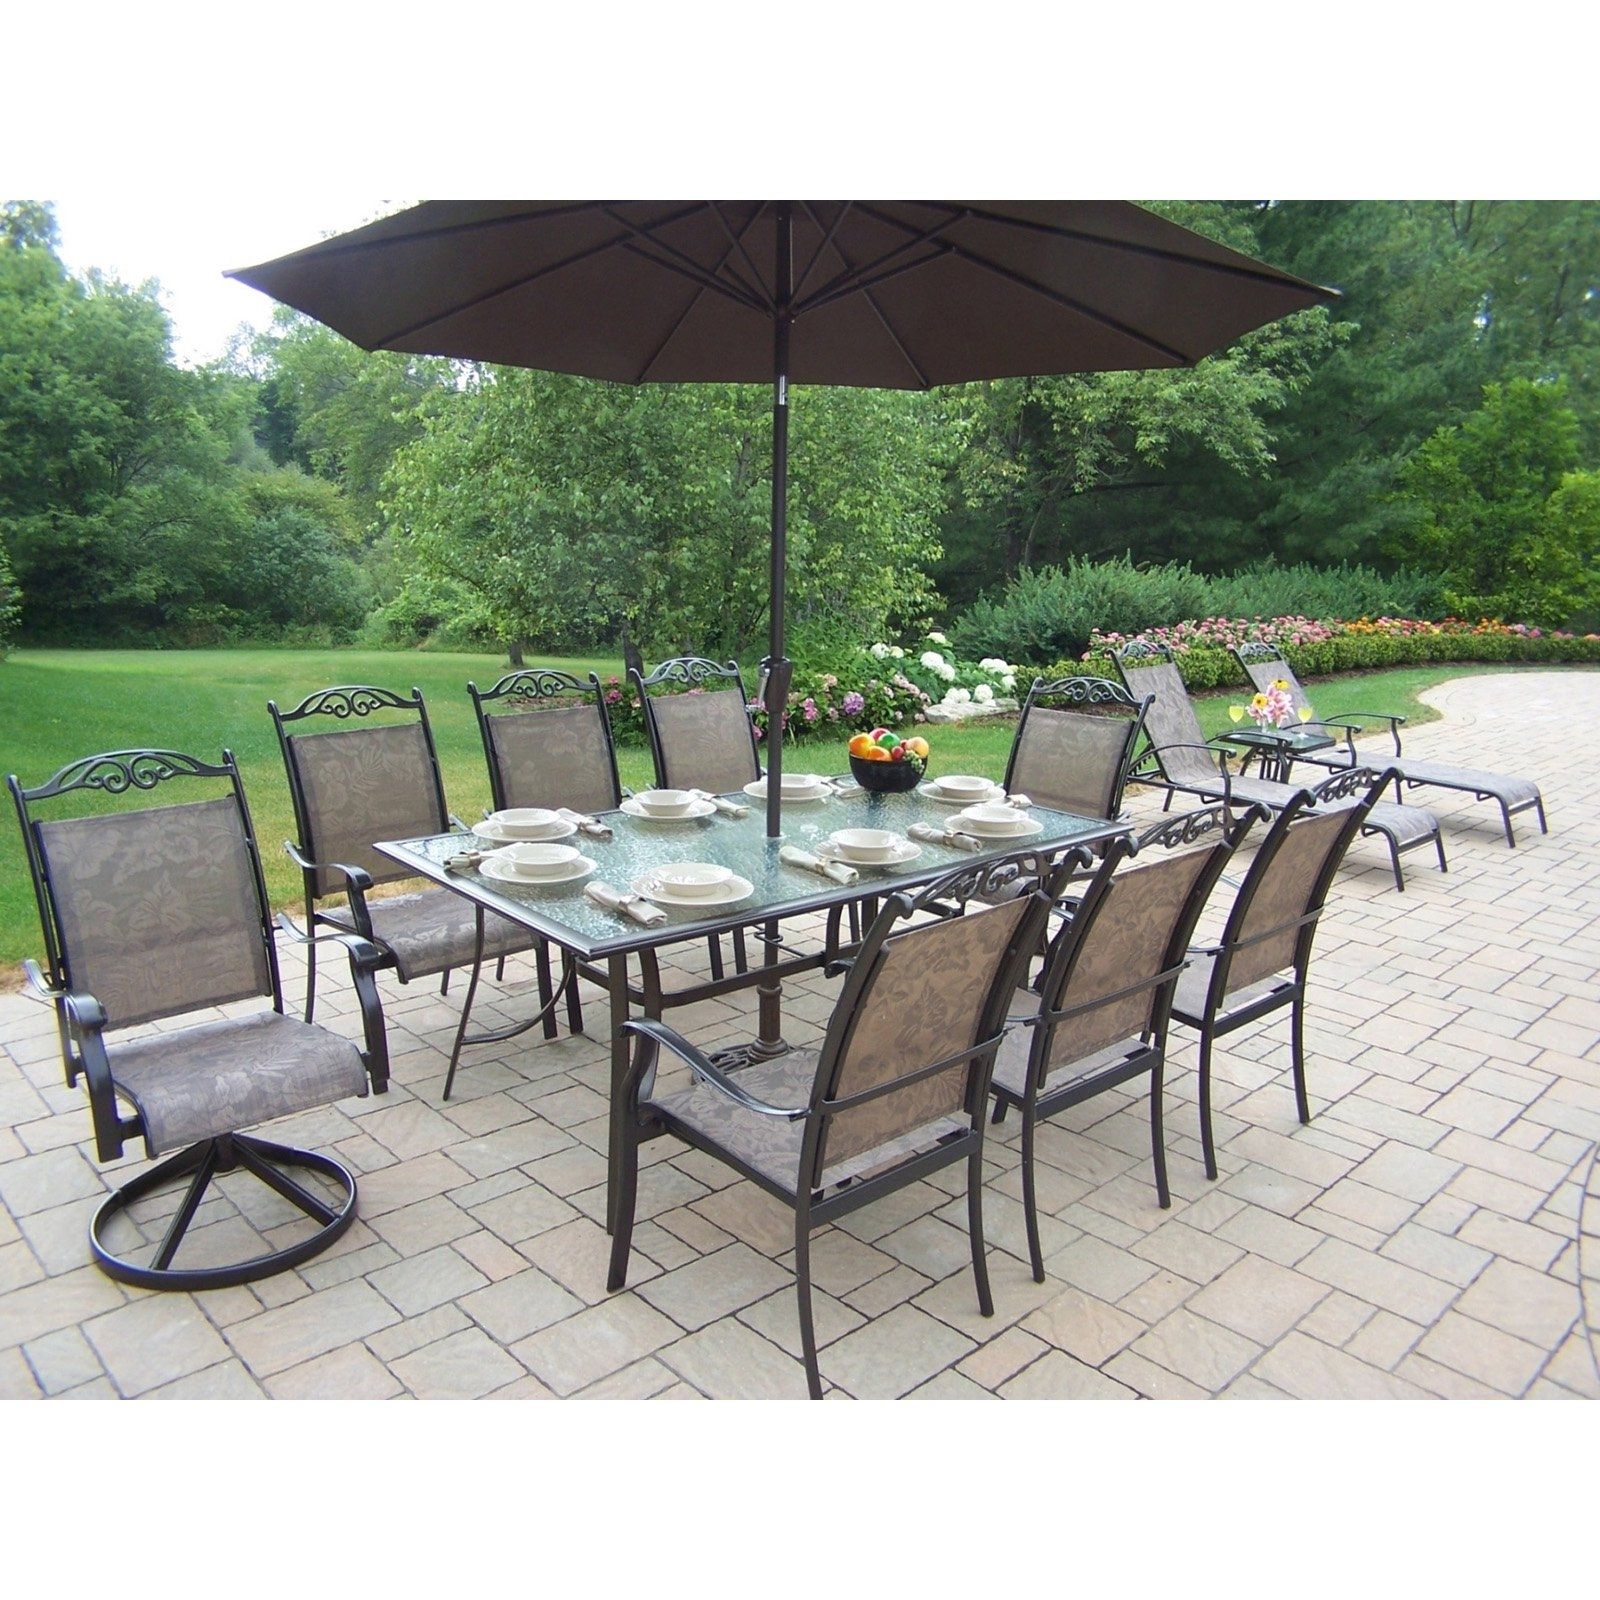 Famous Patio Sets With Umbrellas With Regard To Patio Furniture Walmart Patio Furniture Sets Patio Dining Luxury (View 1 of 20)